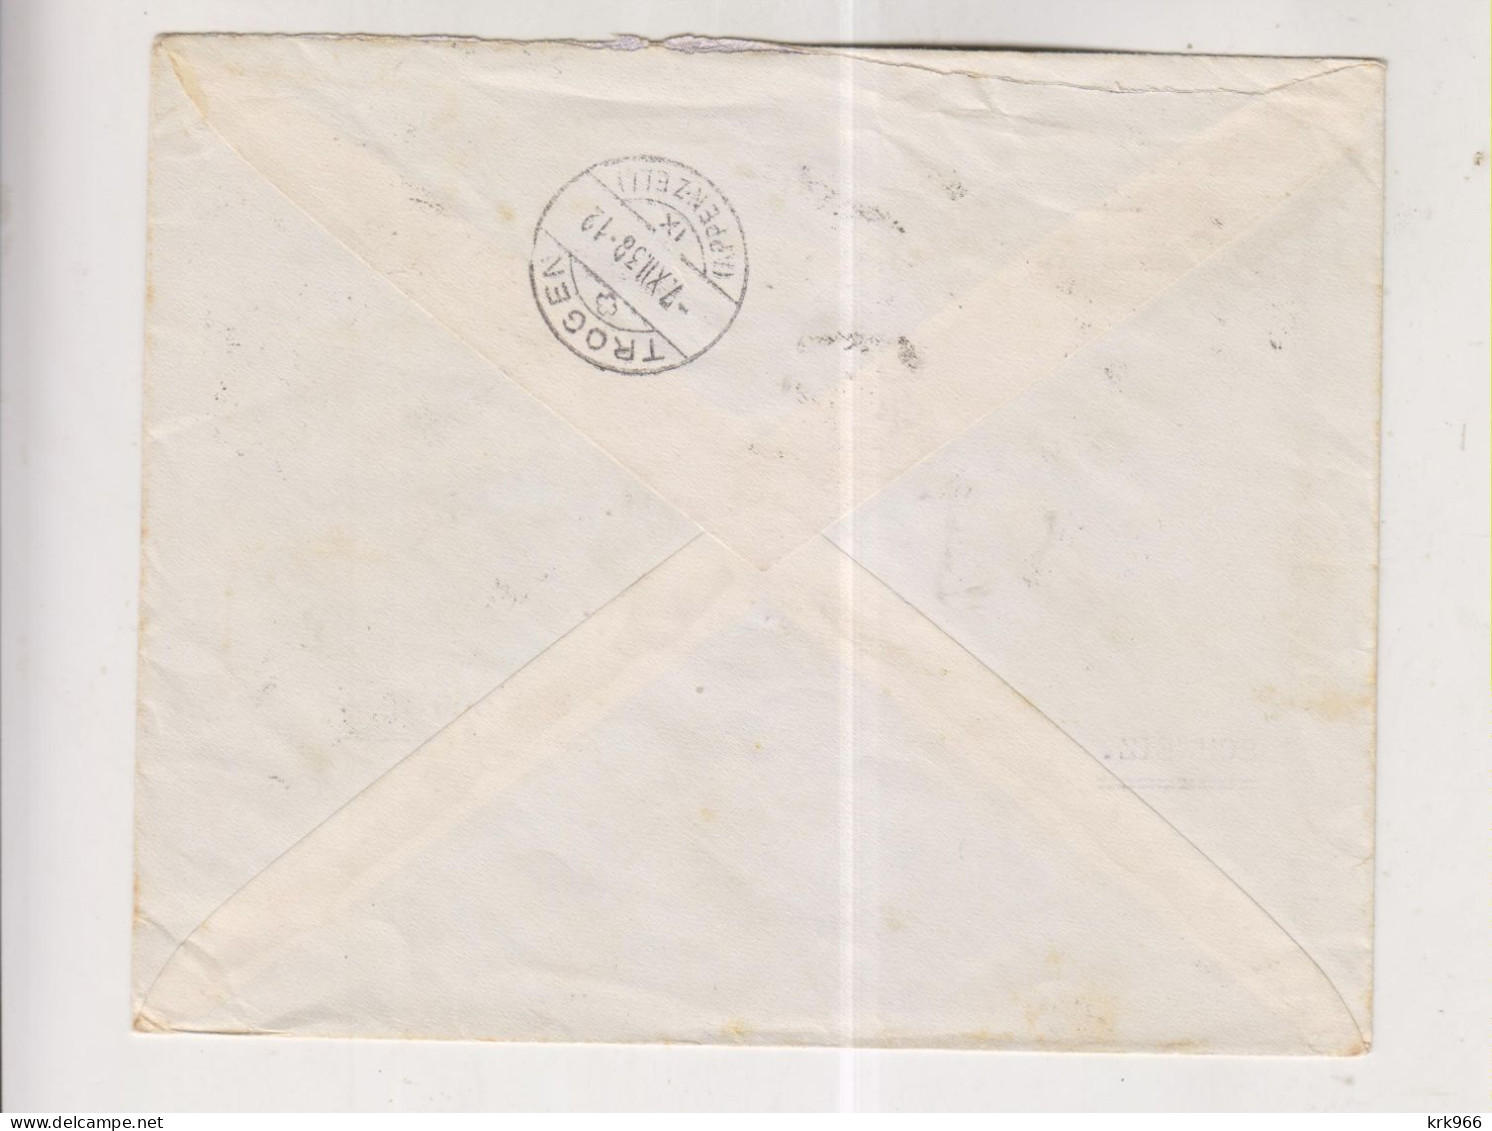 YUGOSLAVIA,1938 BEOGRAD Nice Registered Cover - Covers & Documents